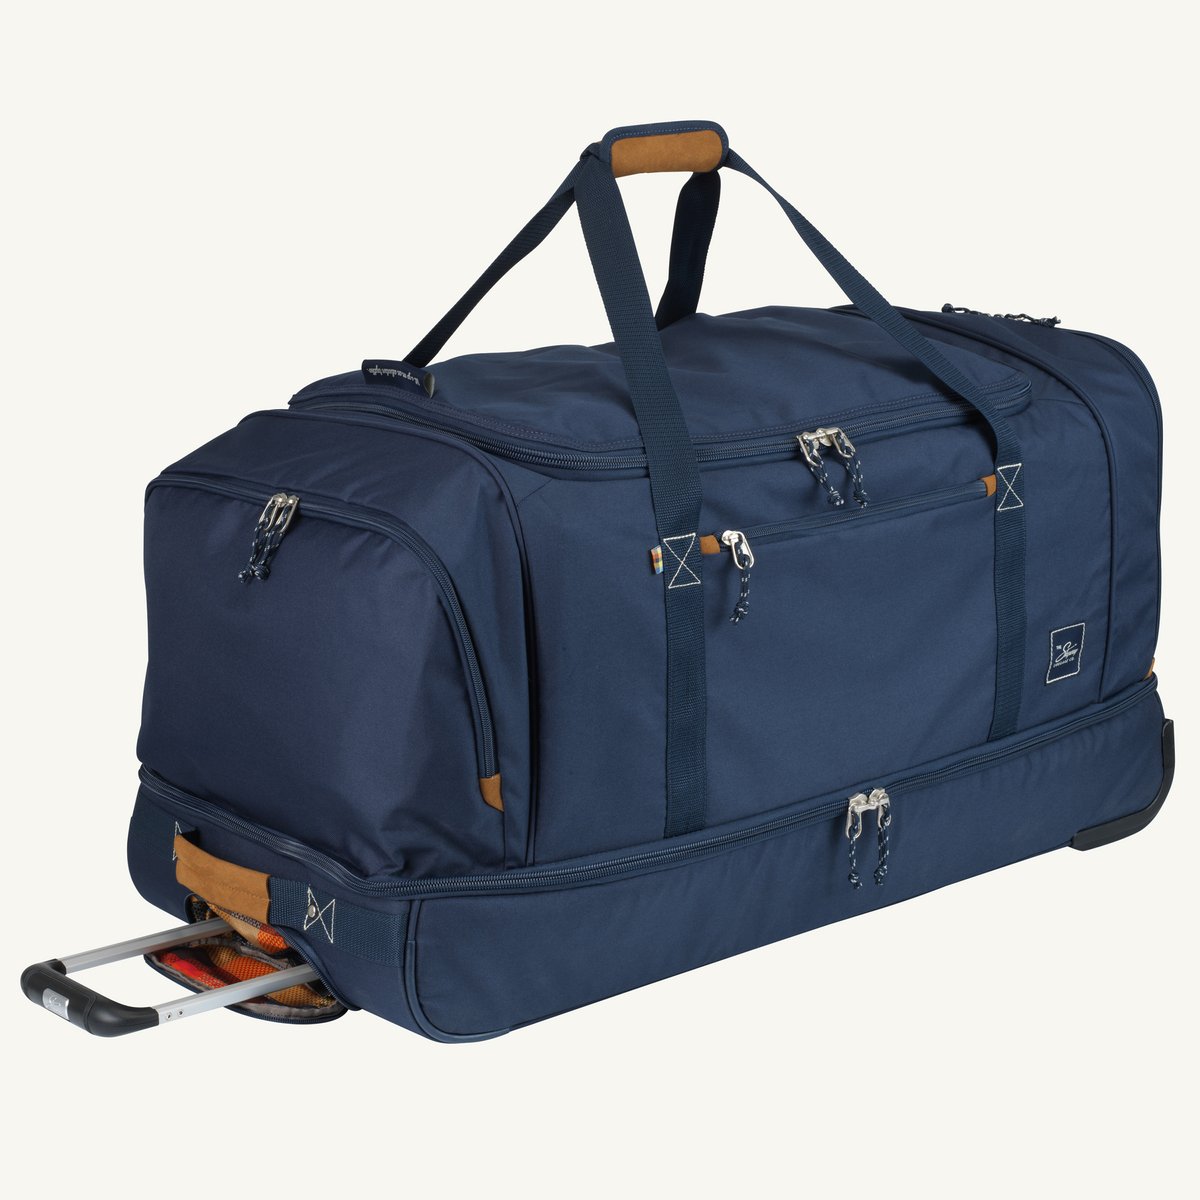 Skyway Luggage Coupeville Extra Large Rolling Duffel Bag 